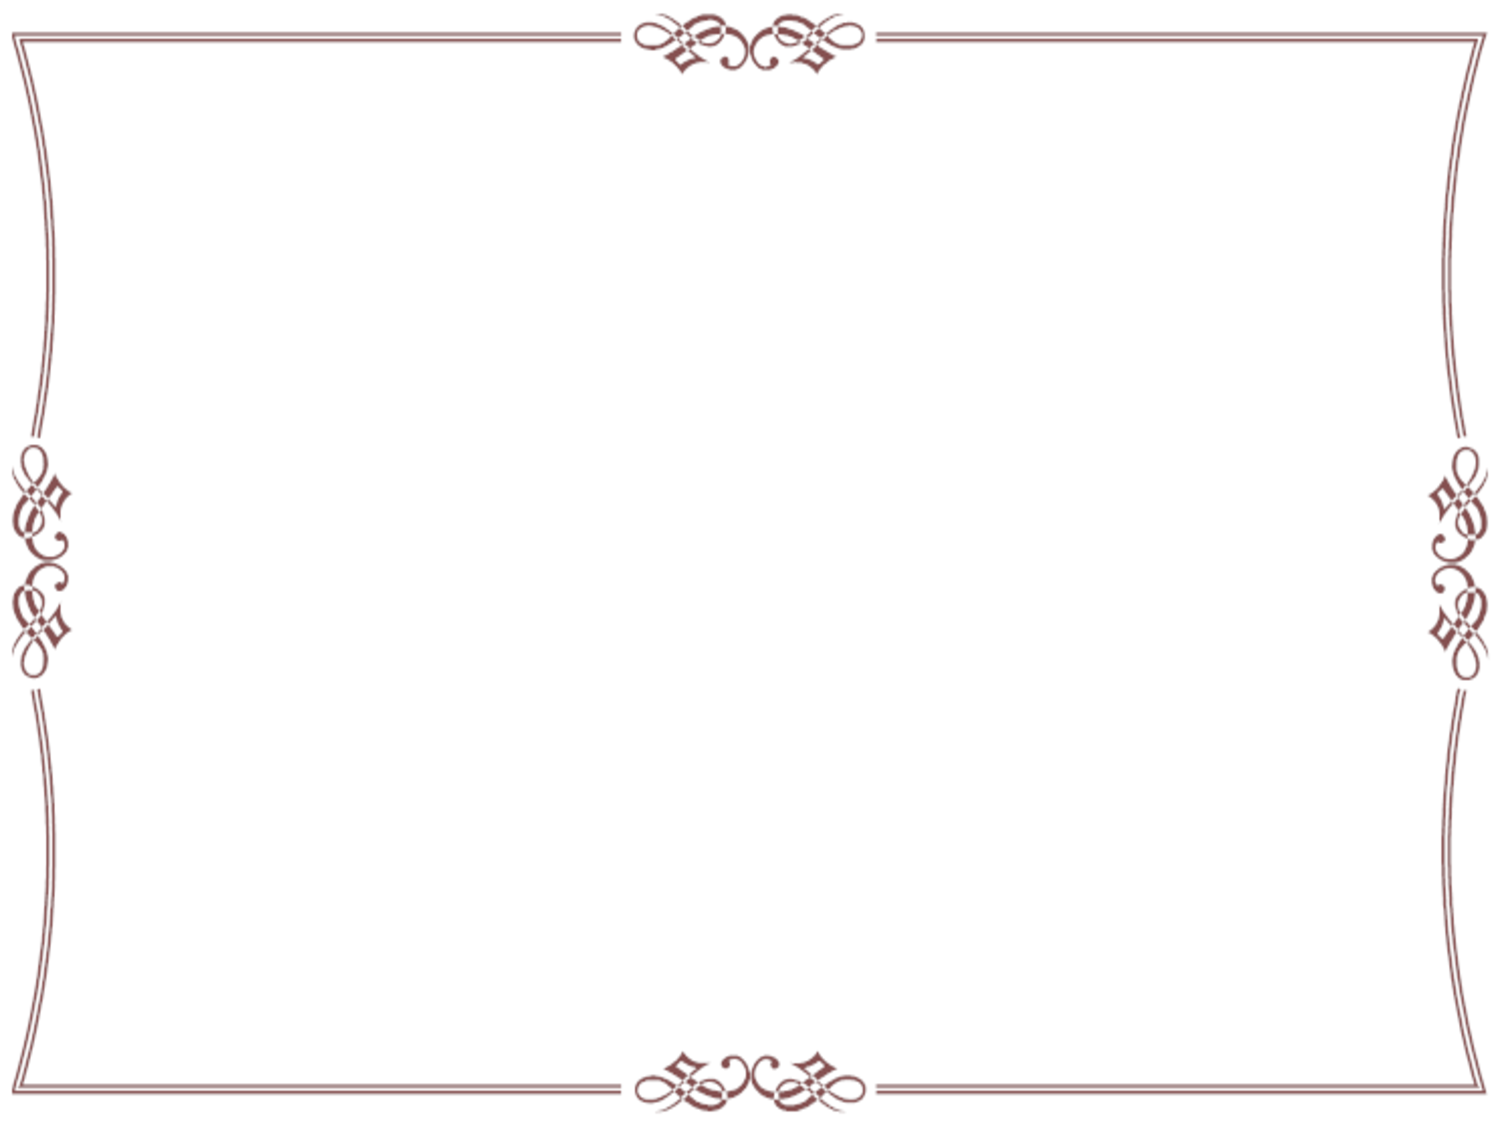 Certificates Borders Free Download - Clipart library